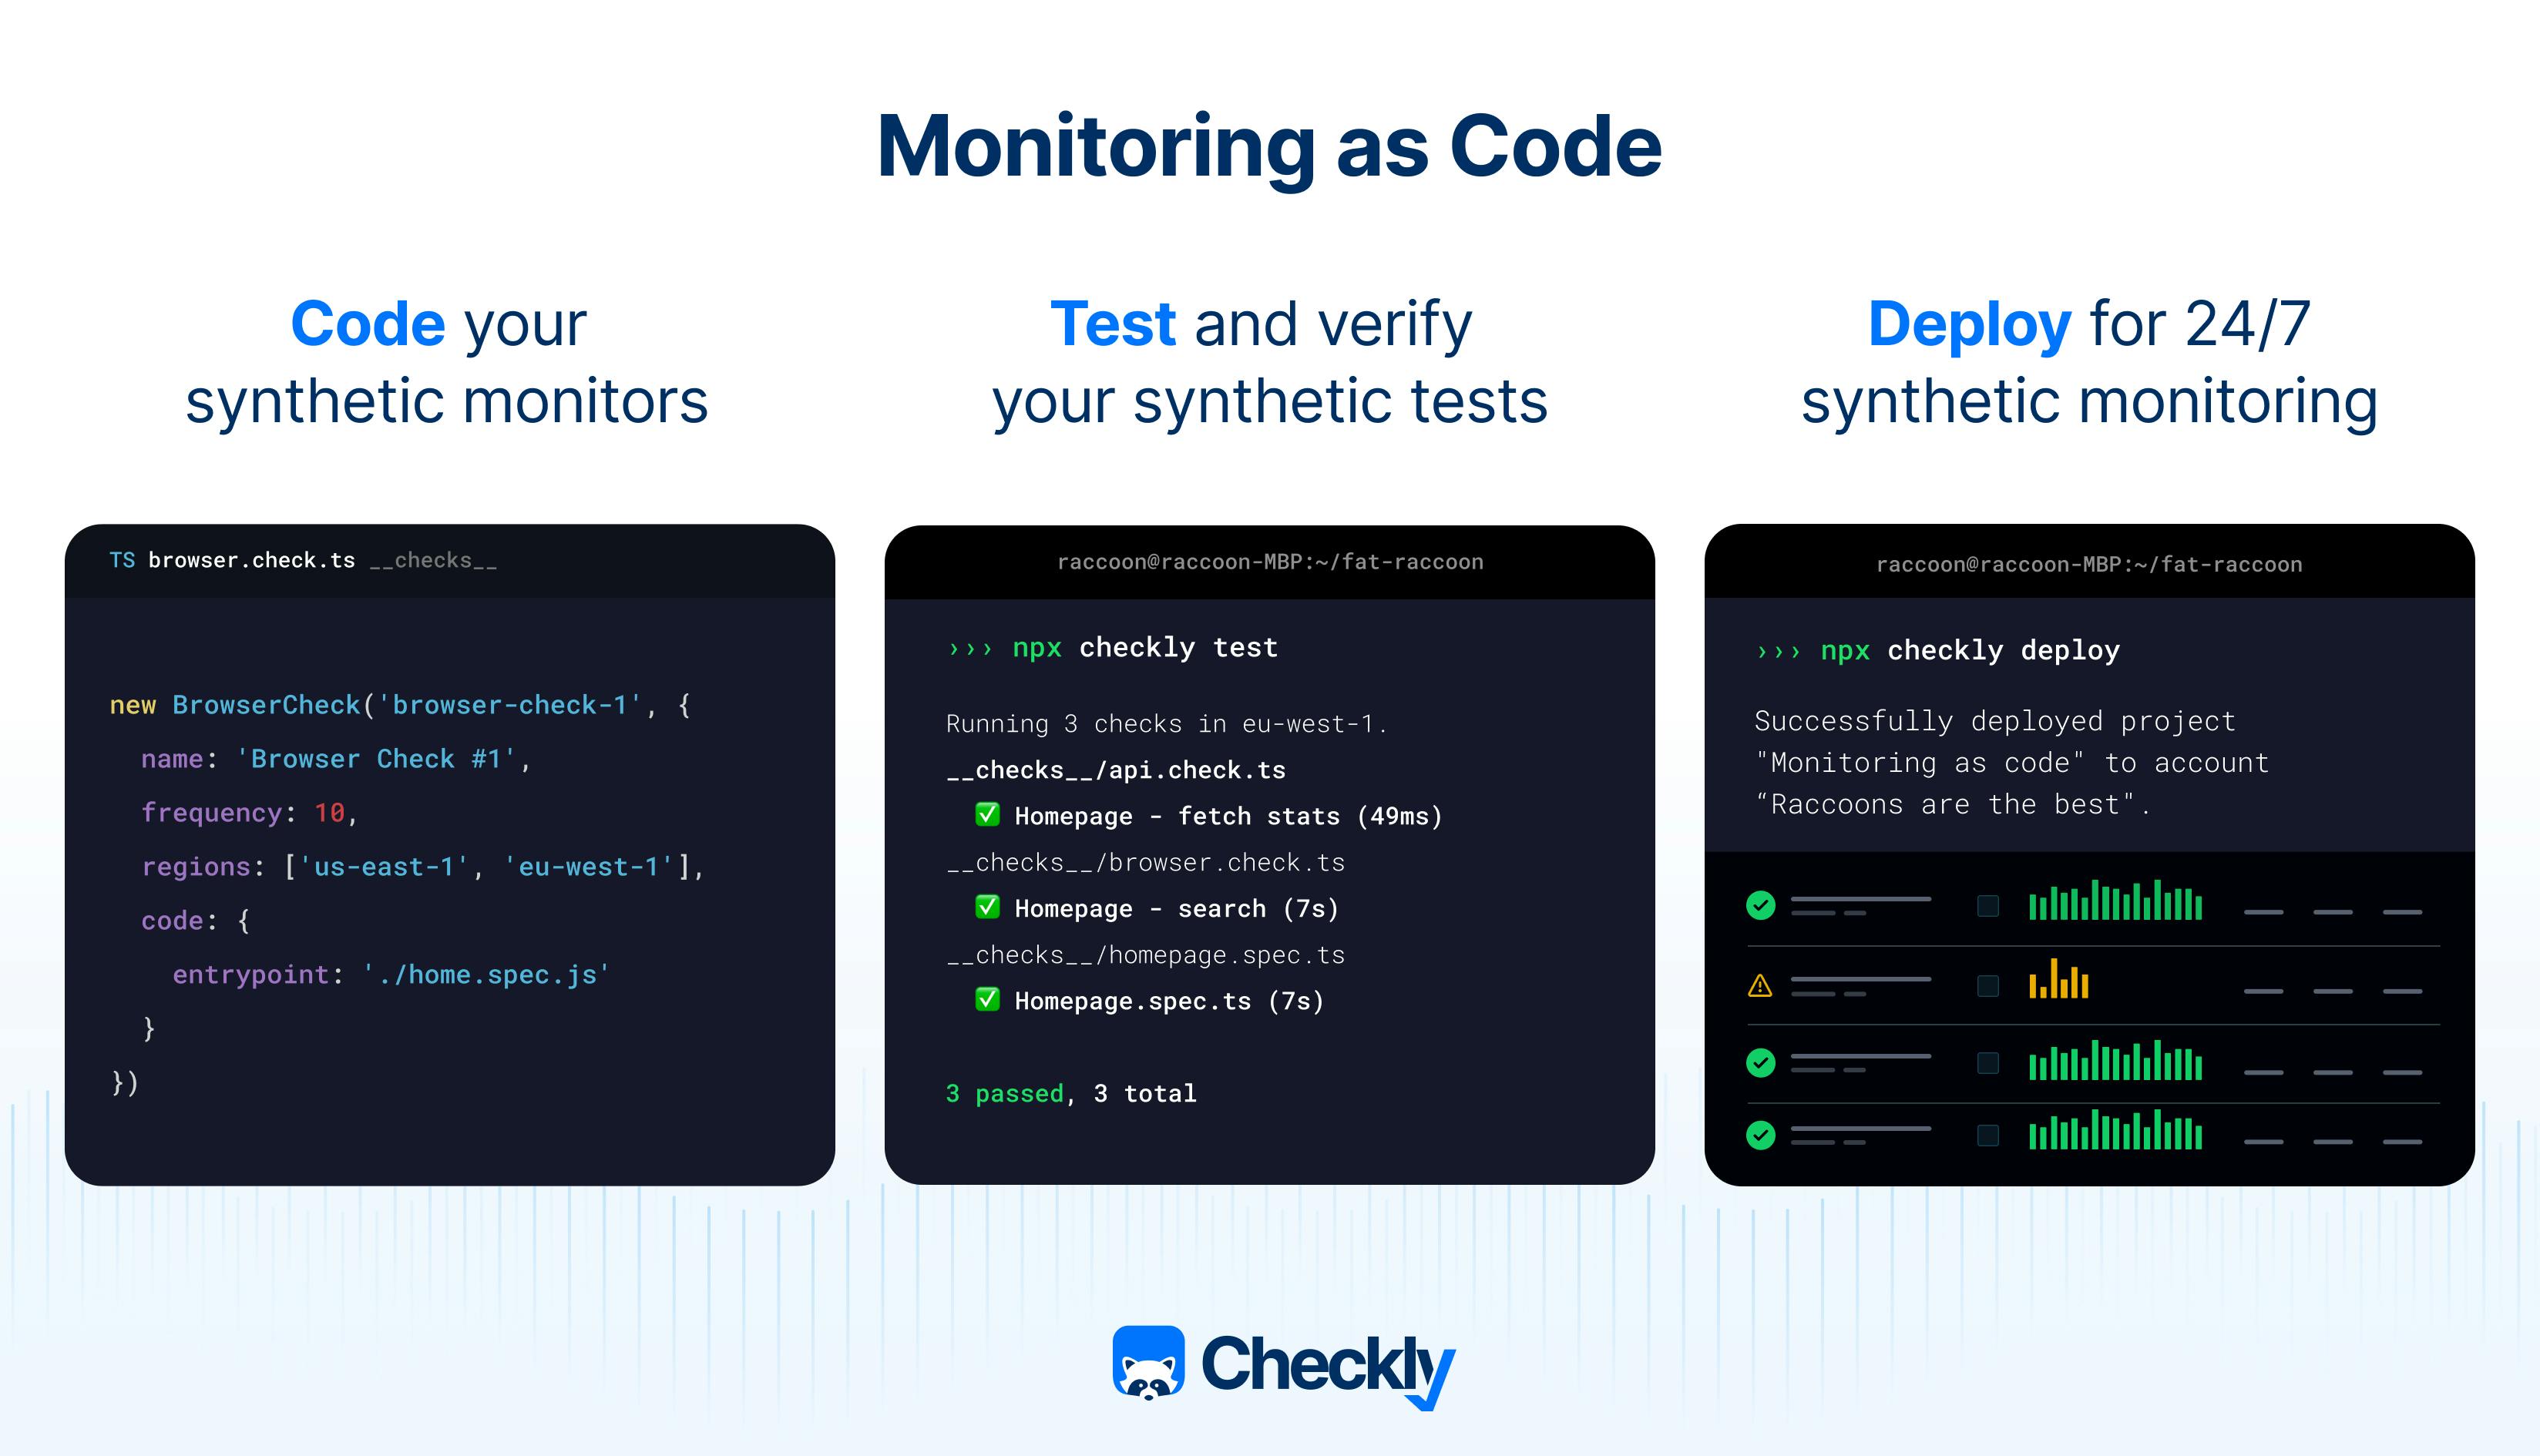 Monitoring as code: 1) code your synthetic monitors. 2) test and verify your synthetic tests 3) deploy for 24/7 synthetic monitoring